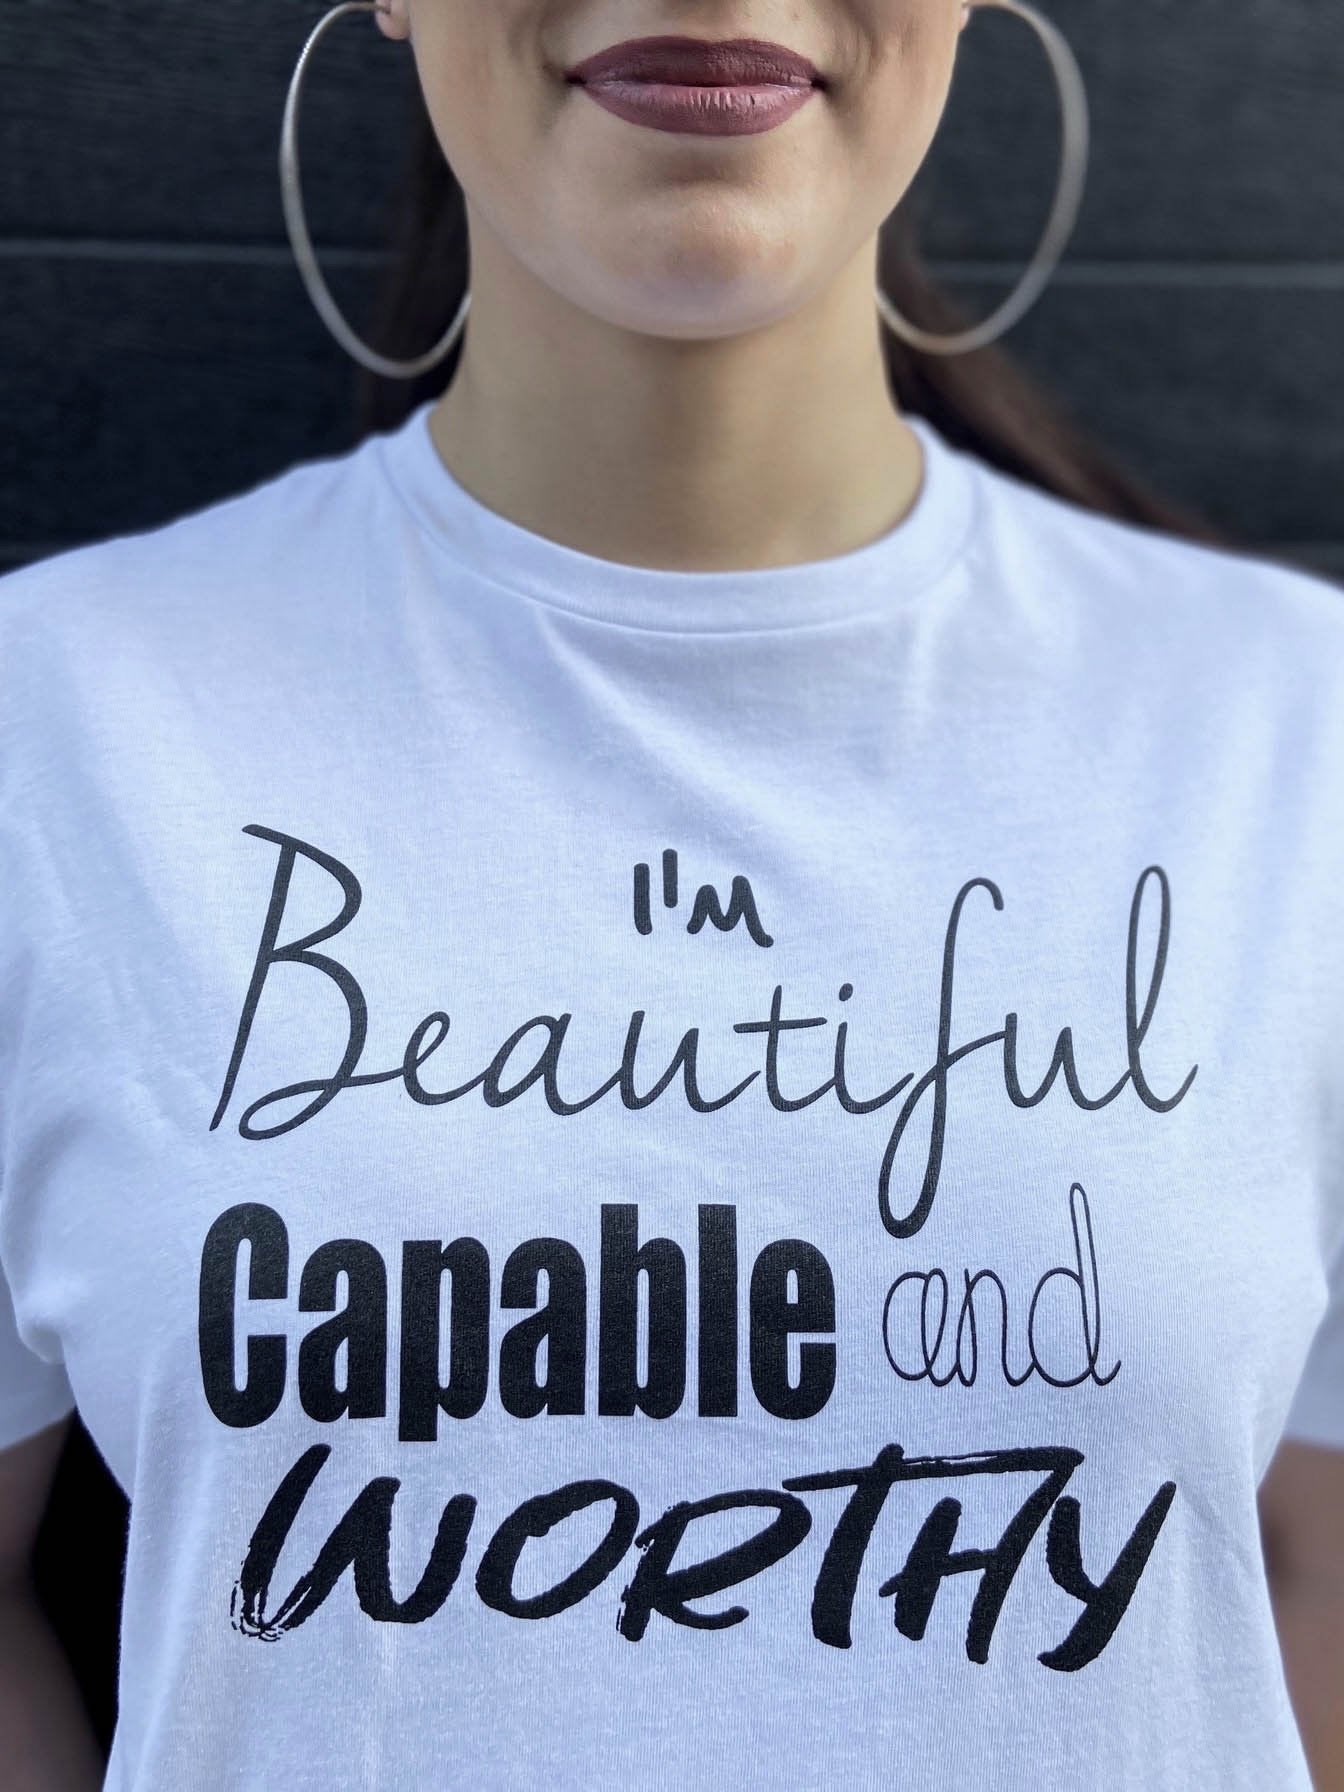 BEAUTIFUL, CAPABLE, AND WORTHY T-SHIRT